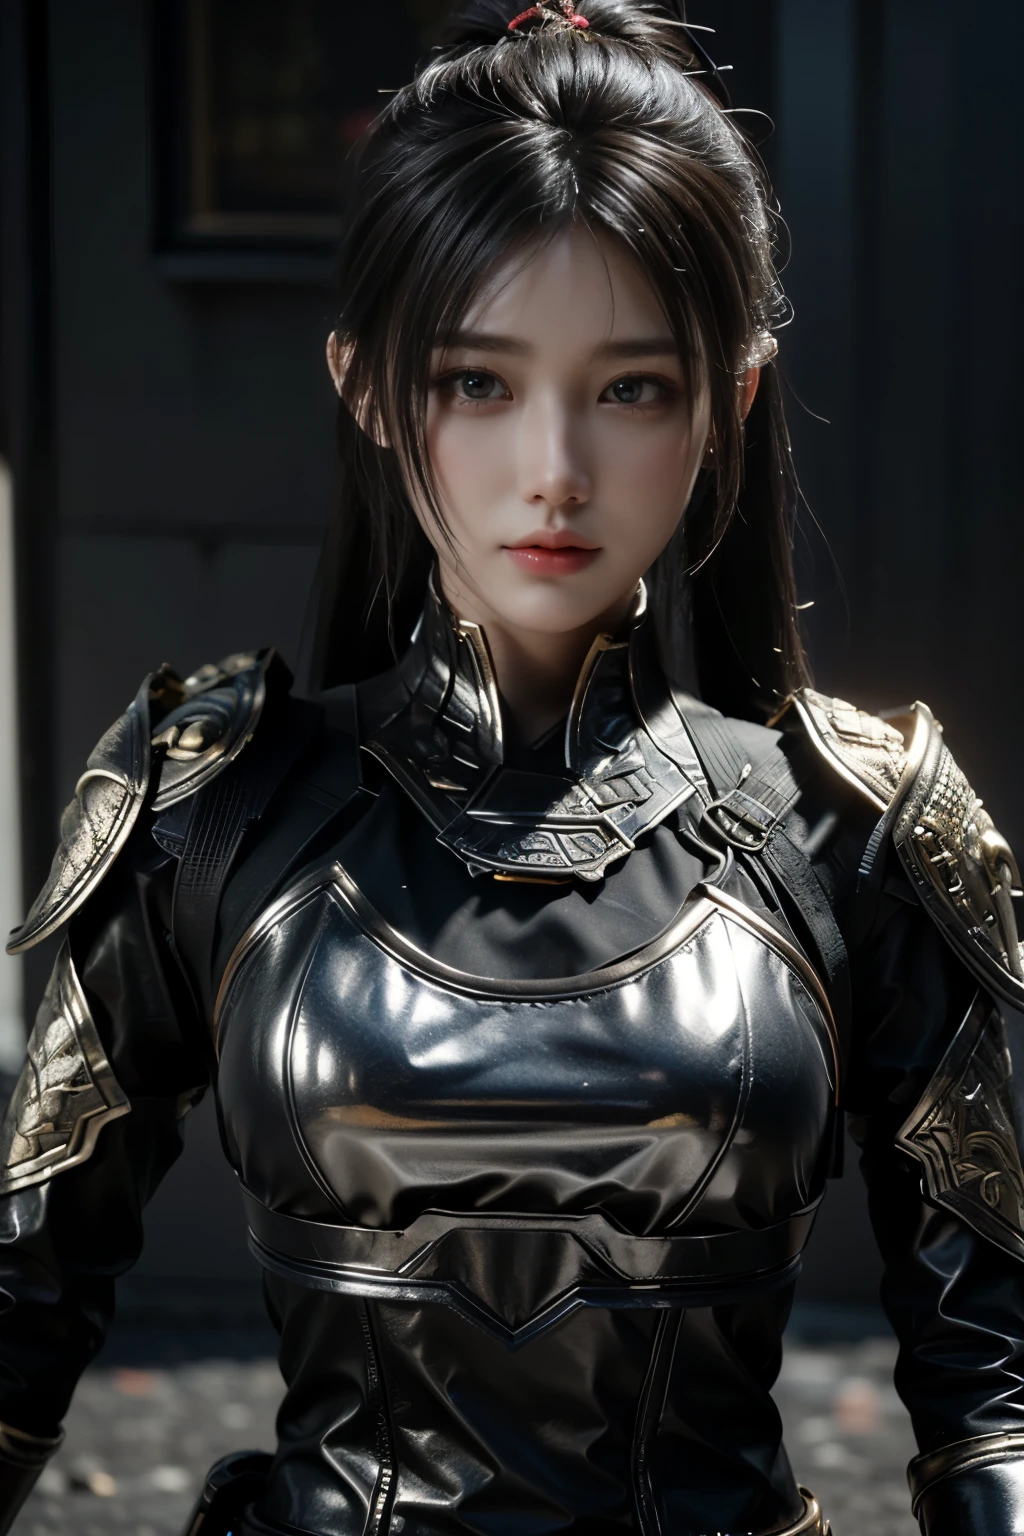 Game art，The best picture quality，Highest resolution，8K，(Portrait:1.5)，(Head close-up)，(Rule of thirds)，Unreal Engine 5 rendering works， (The Girl of the Future)，(Female Warrior)， 
20-year-old girl，An eye rich in detail，(Big breasts)，Elegant and noble，indifferent，brave，
(Future style combat suit combining the characteristics of ancient armor，Ancient runes of light，Combat accessories with rich detailetallic luster)，Future police，cyberpunk characters，

photo poses，simple background，Movie lights，Ray tracing，Game CG，((3D Unreal Engine))，OC rendering reflection pattern